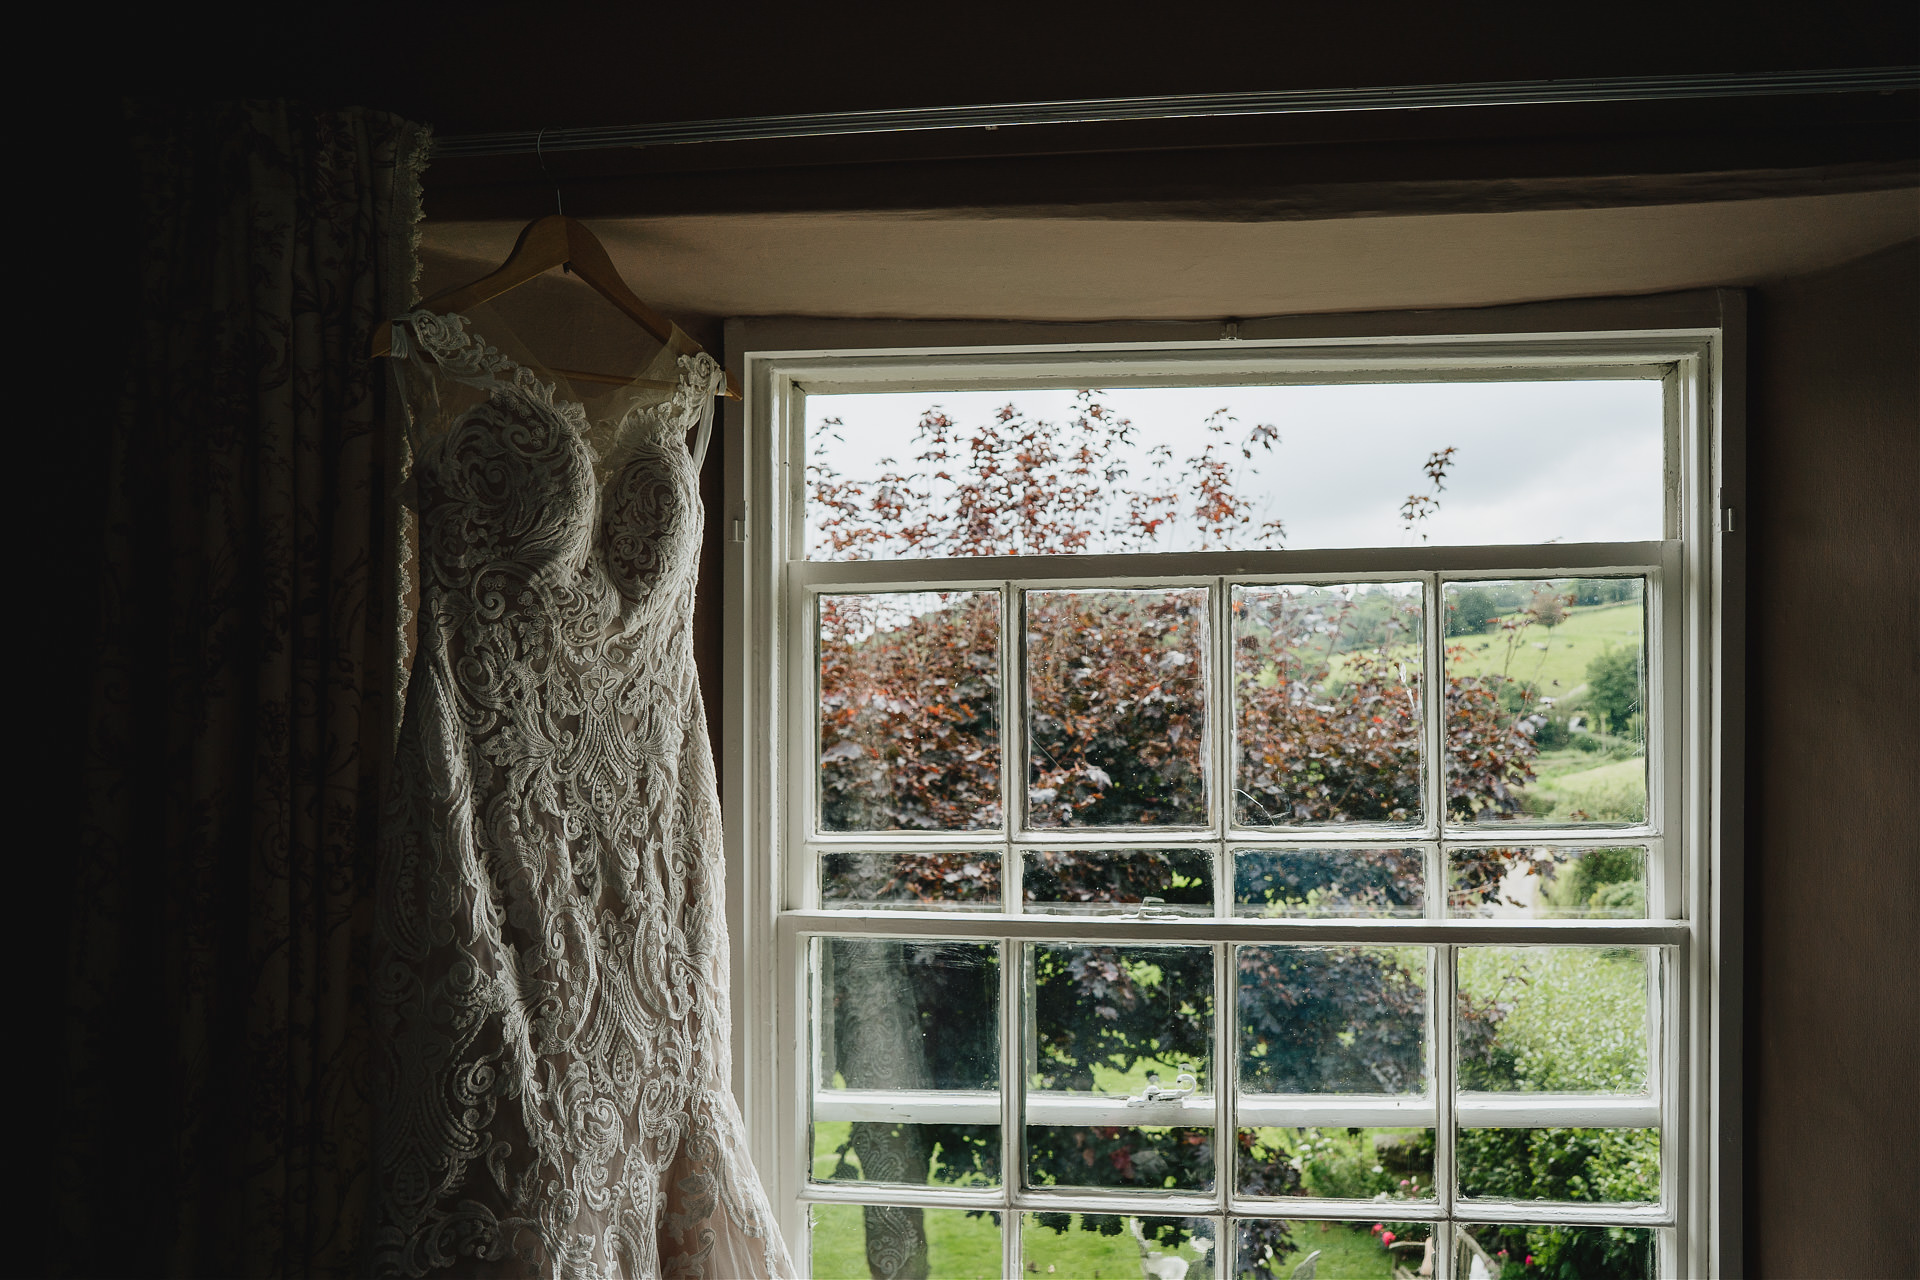 Wedding dress hanging up in a window with amazing country views outside